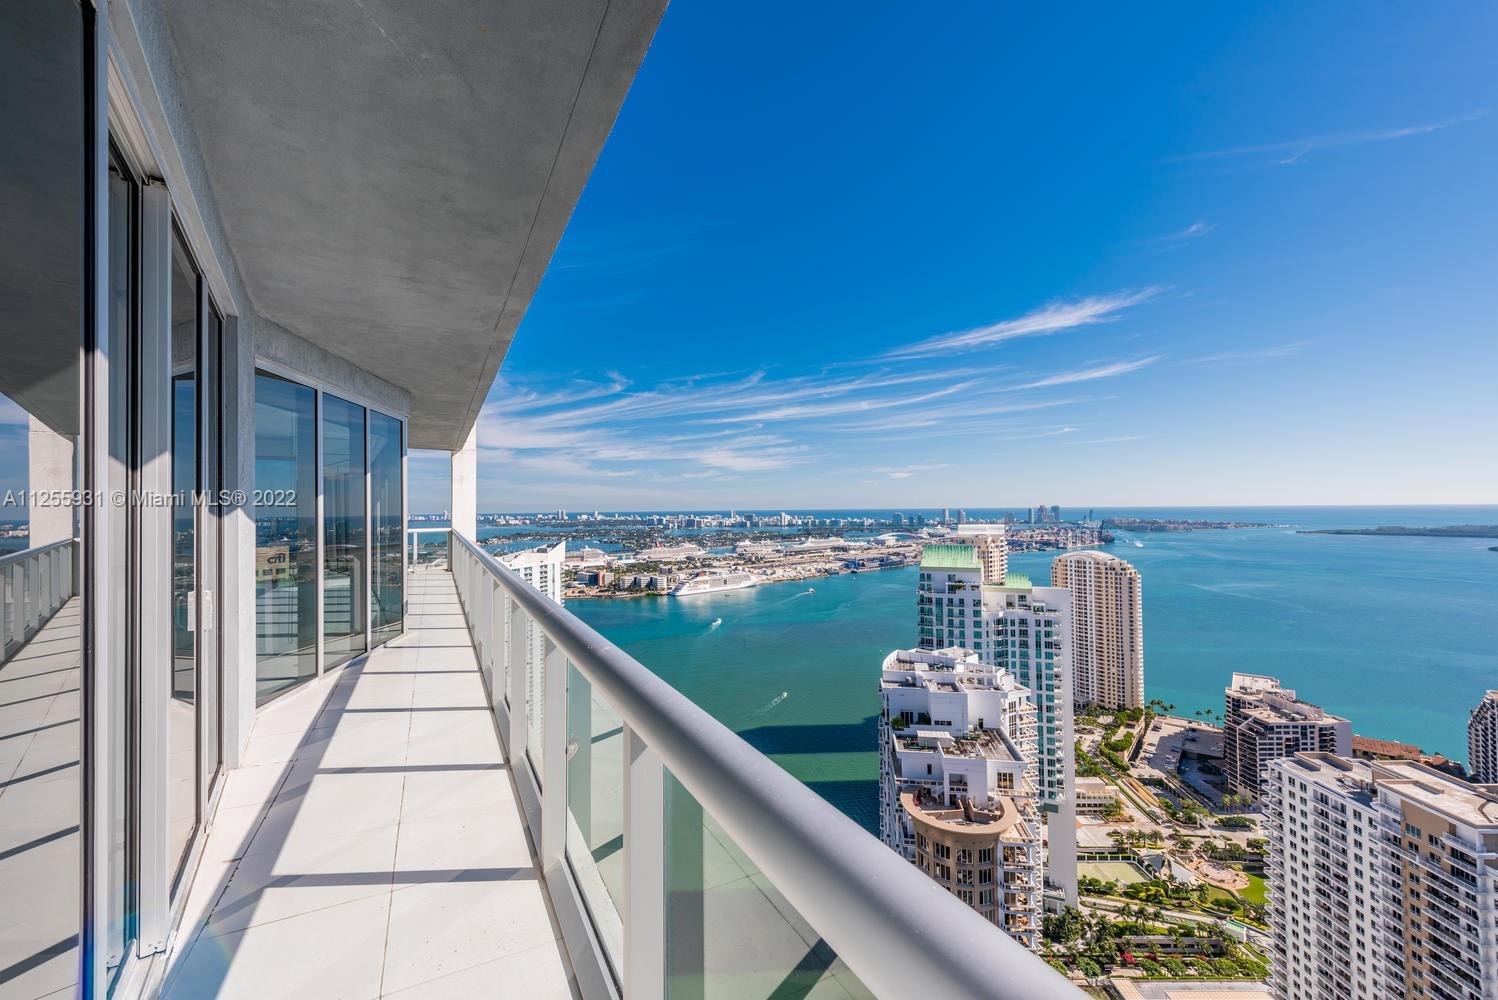 Corner lower penthouse unit at Icon Brickell tower one. This bright three bedroom 2.5 bath unit features panoramic views to Miami Beach and Key Biscayne. Unit has ceramic white tile and build out closets. One assigned parking space. Unit is not contingent to appraisal or financing. Easy to show, it will not last!